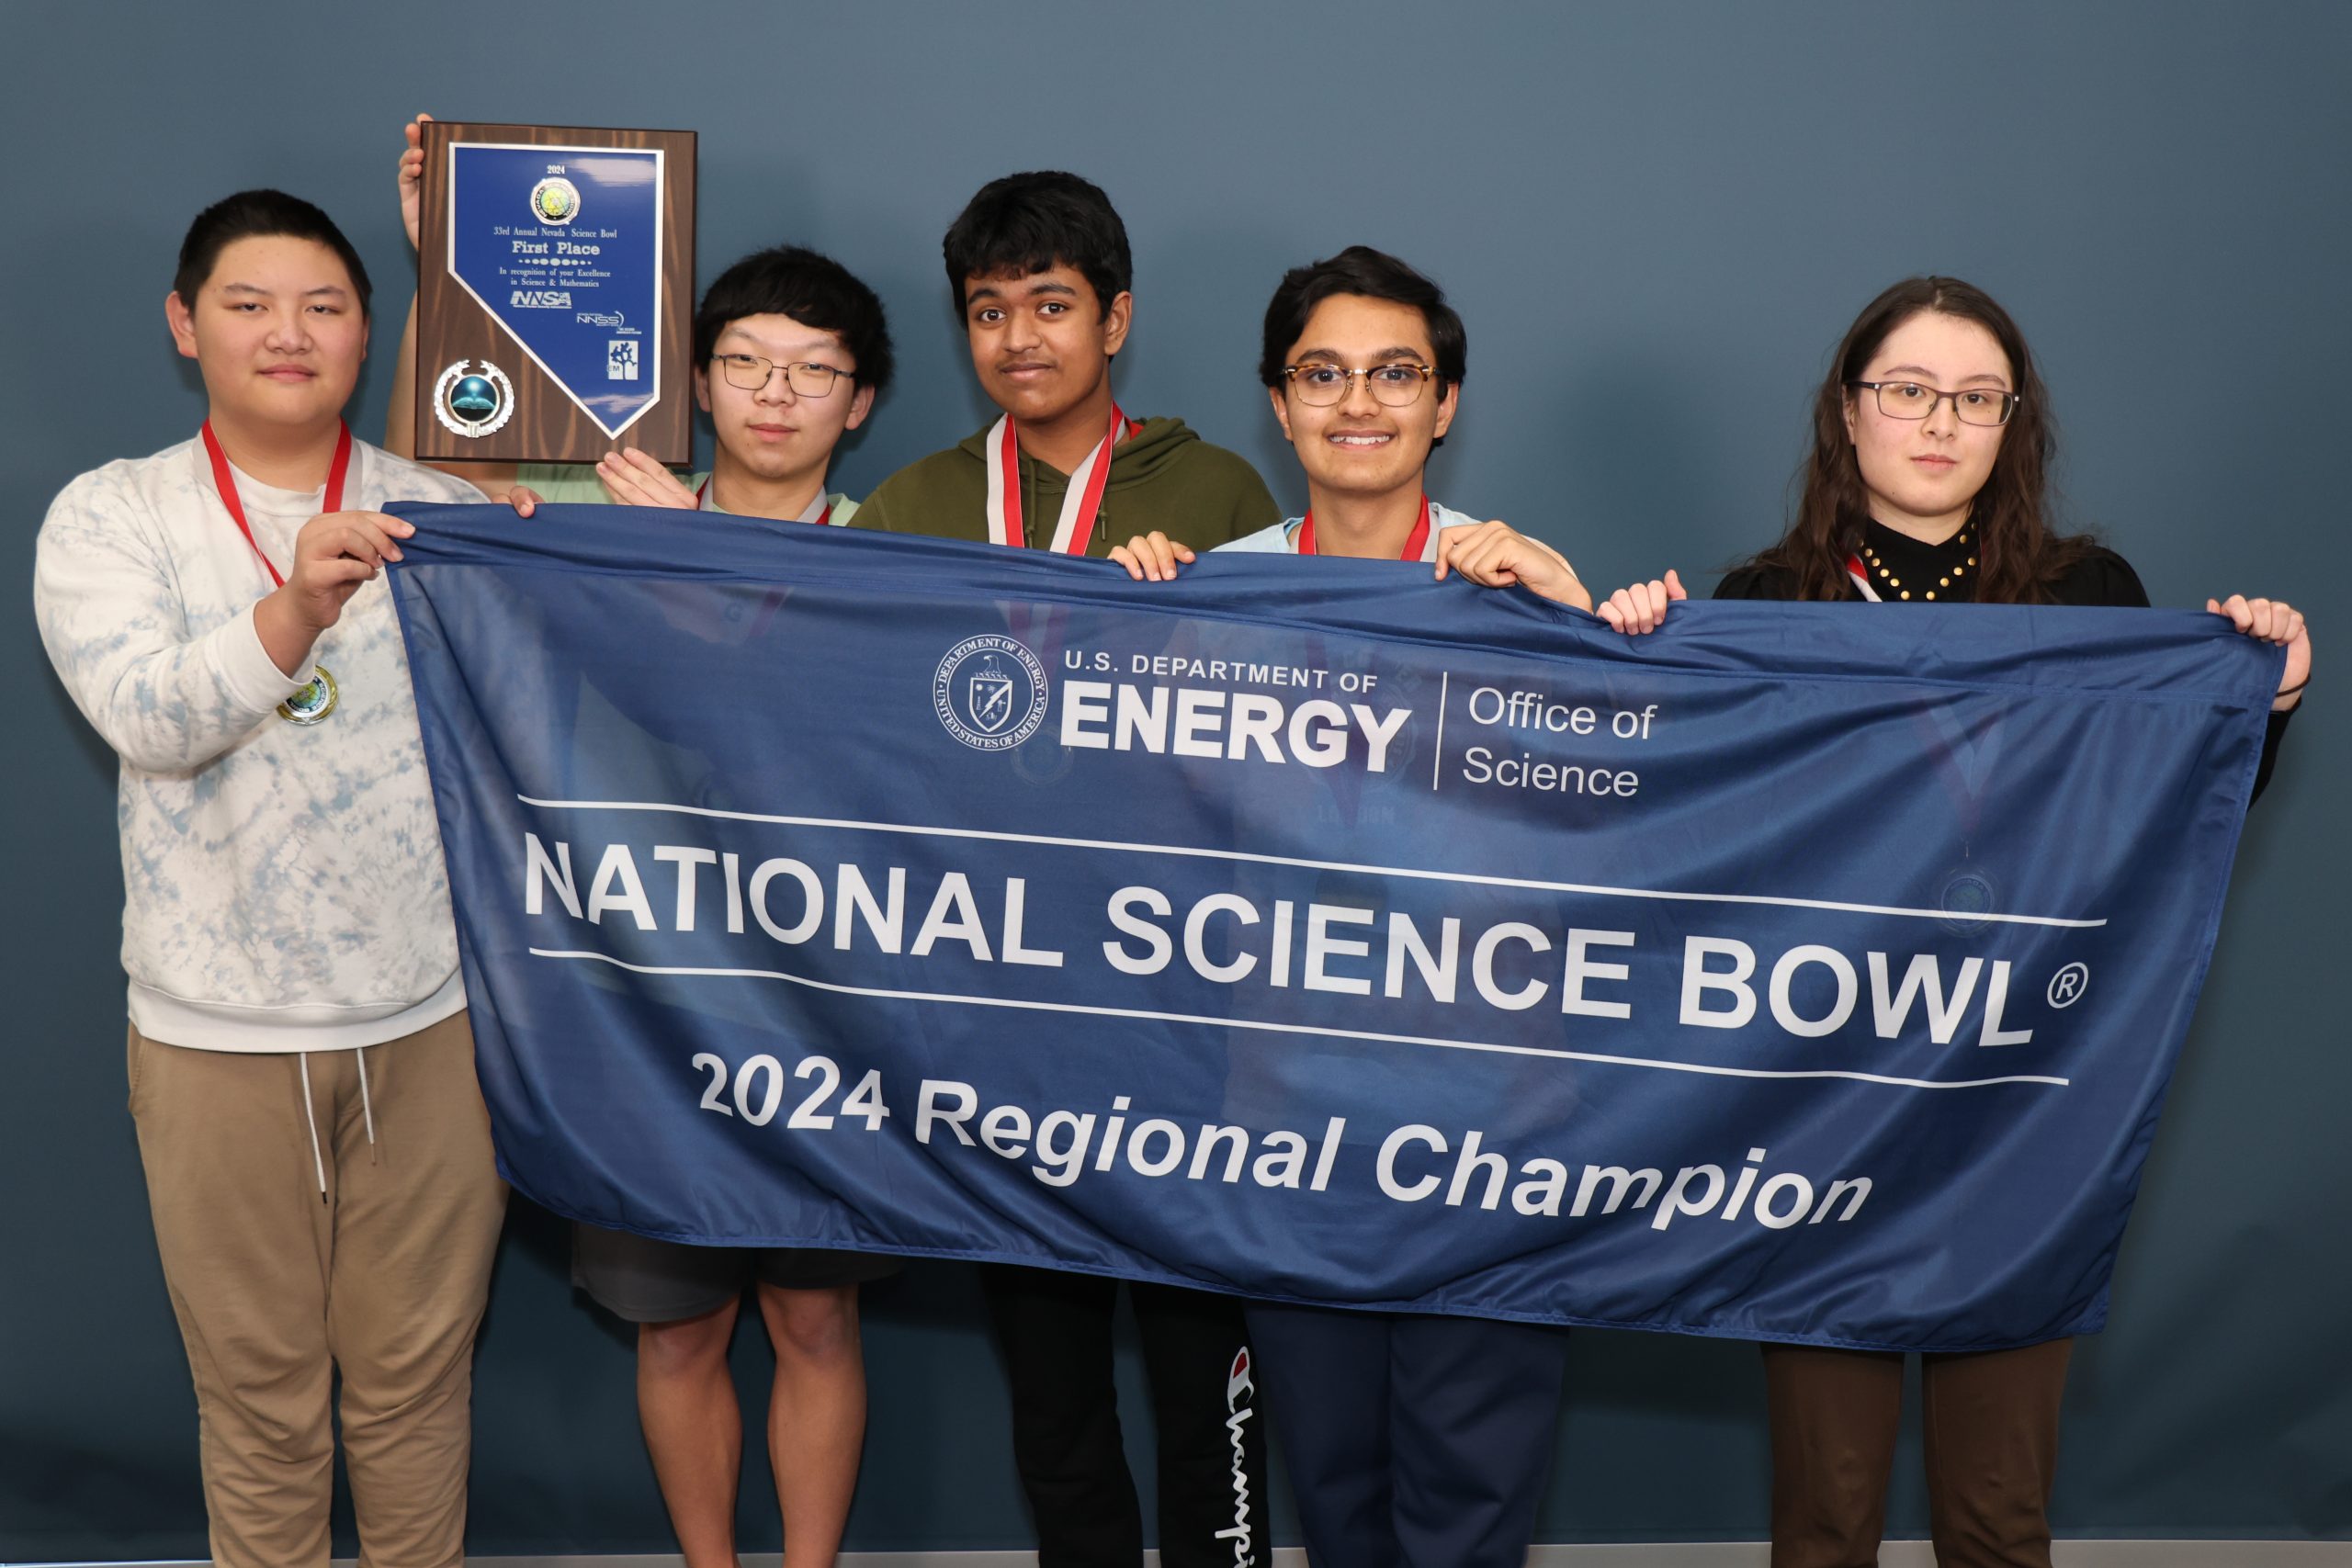 Five students hold a navy blue banner that reads "2024 Regional Champion."